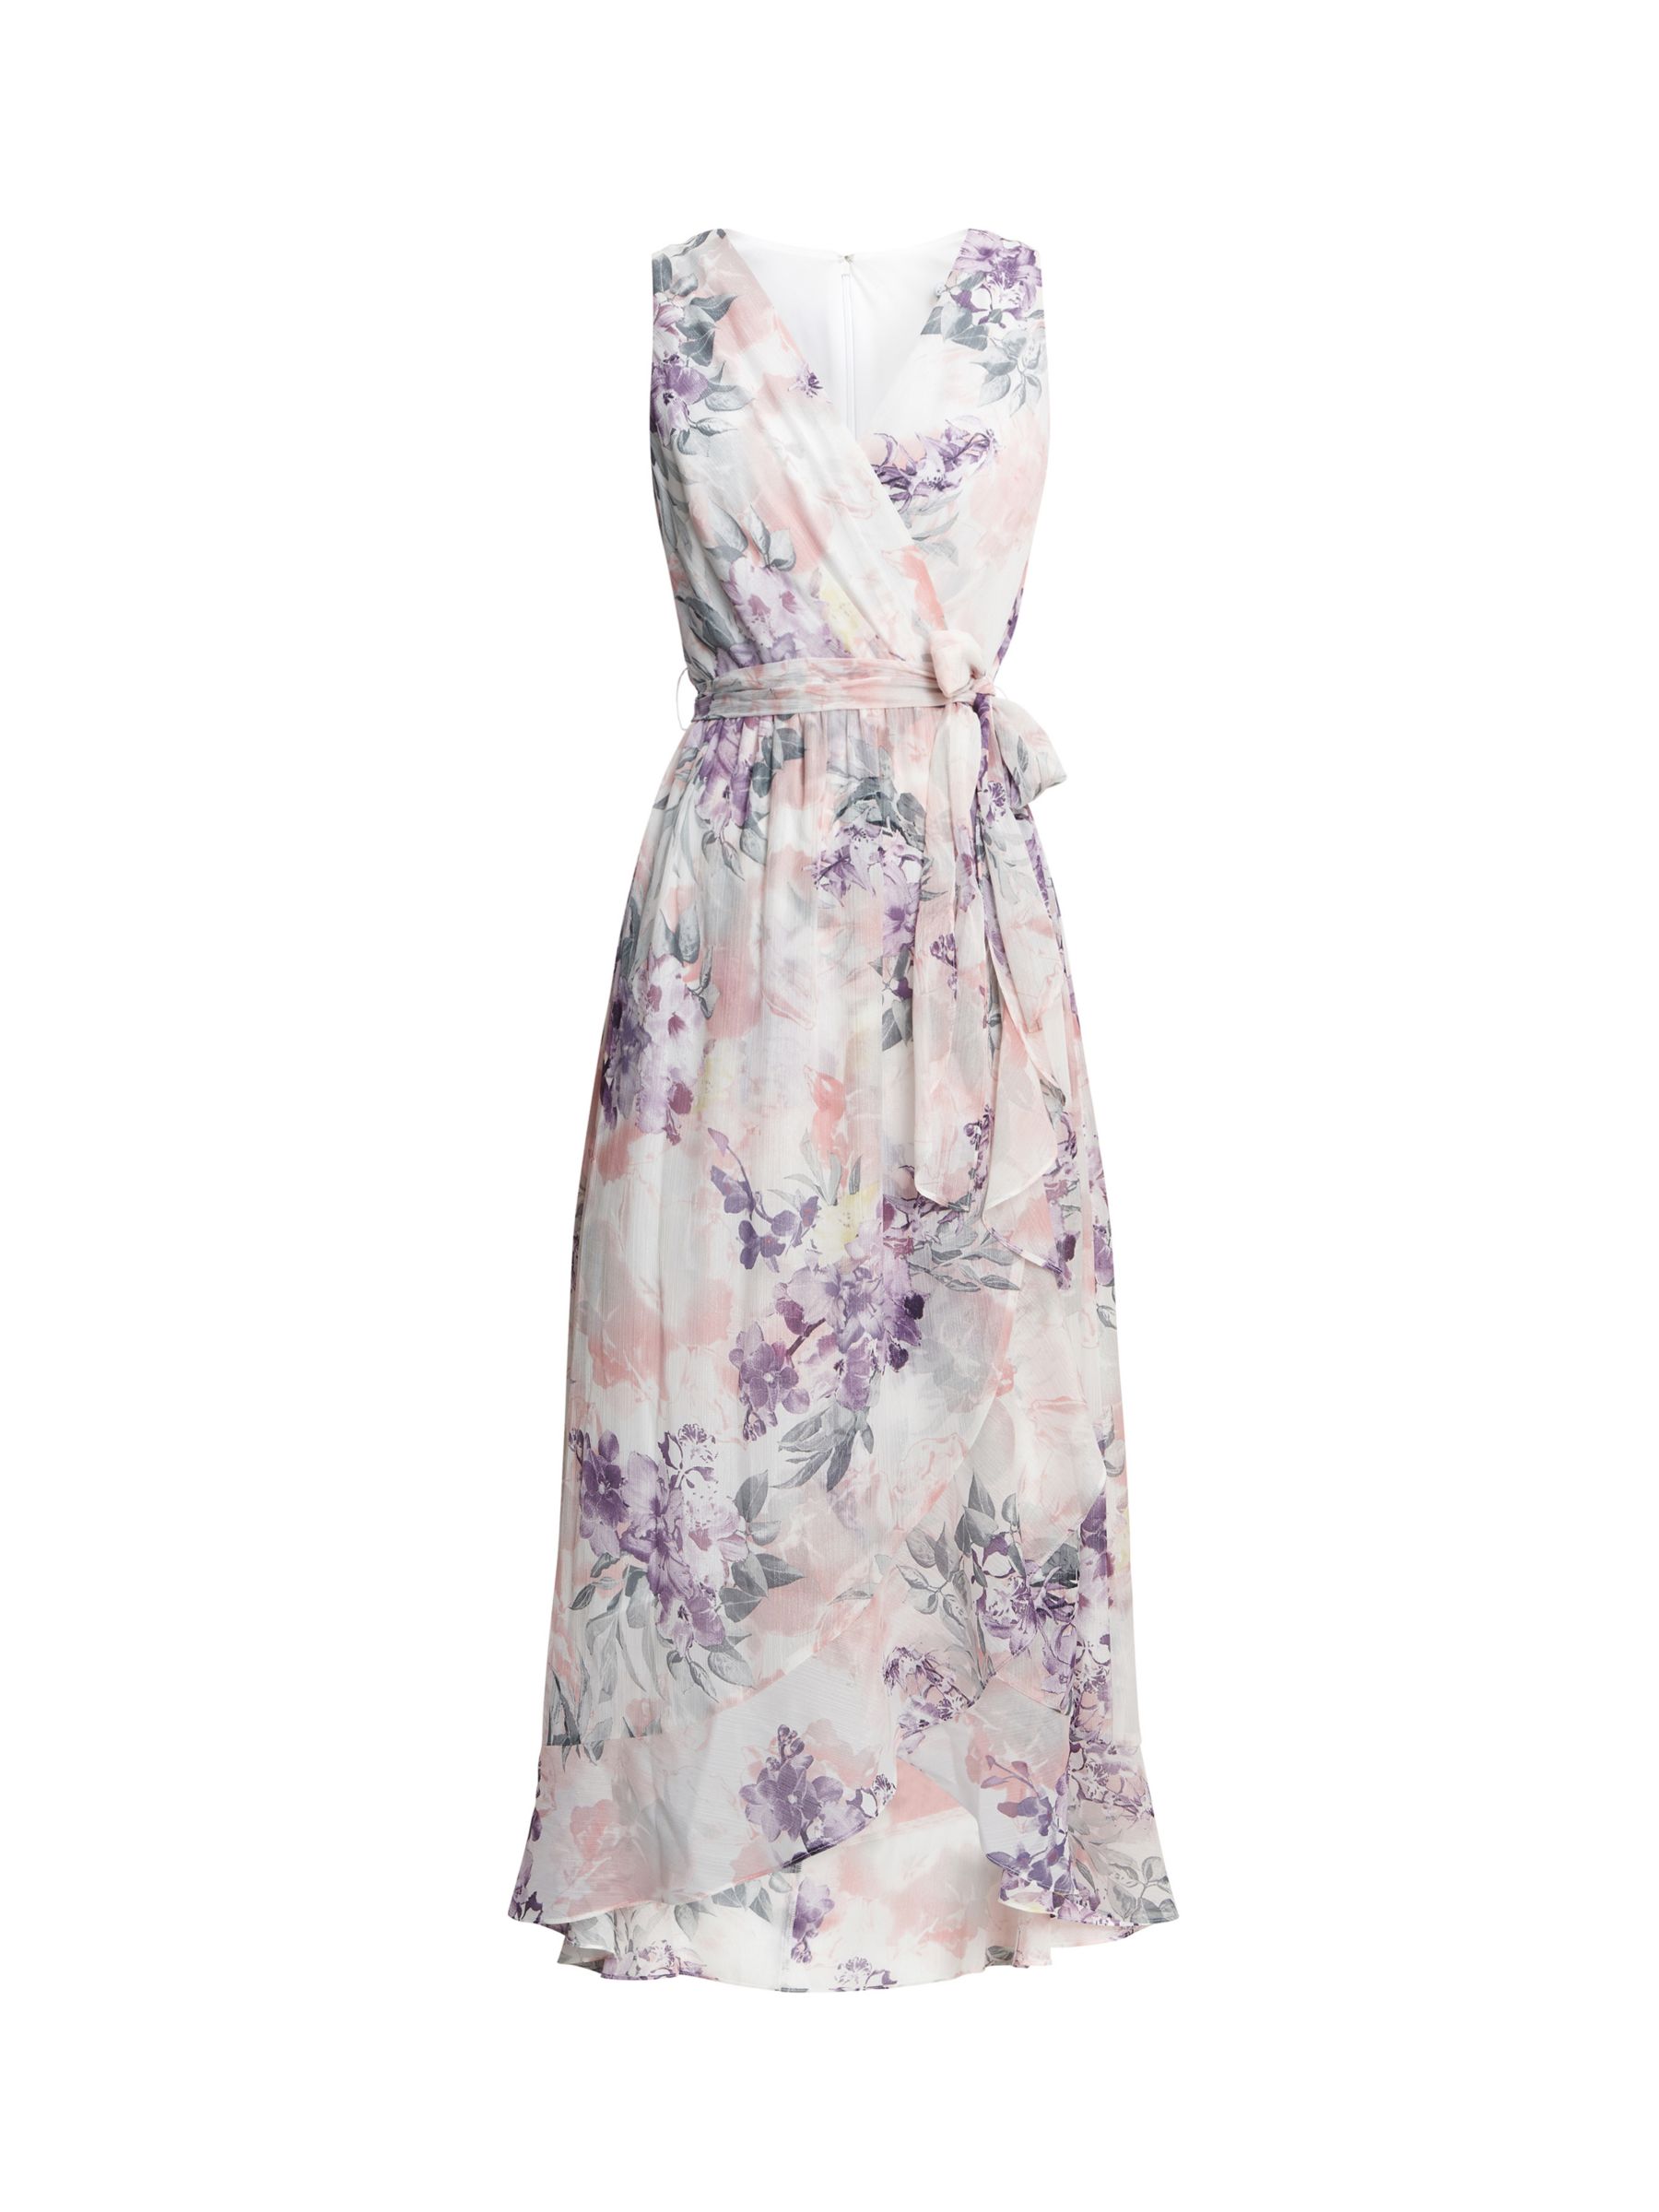 Buy Gina Bacconi Charly Floral Wrap Dress, Multi Online at johnlewis.com